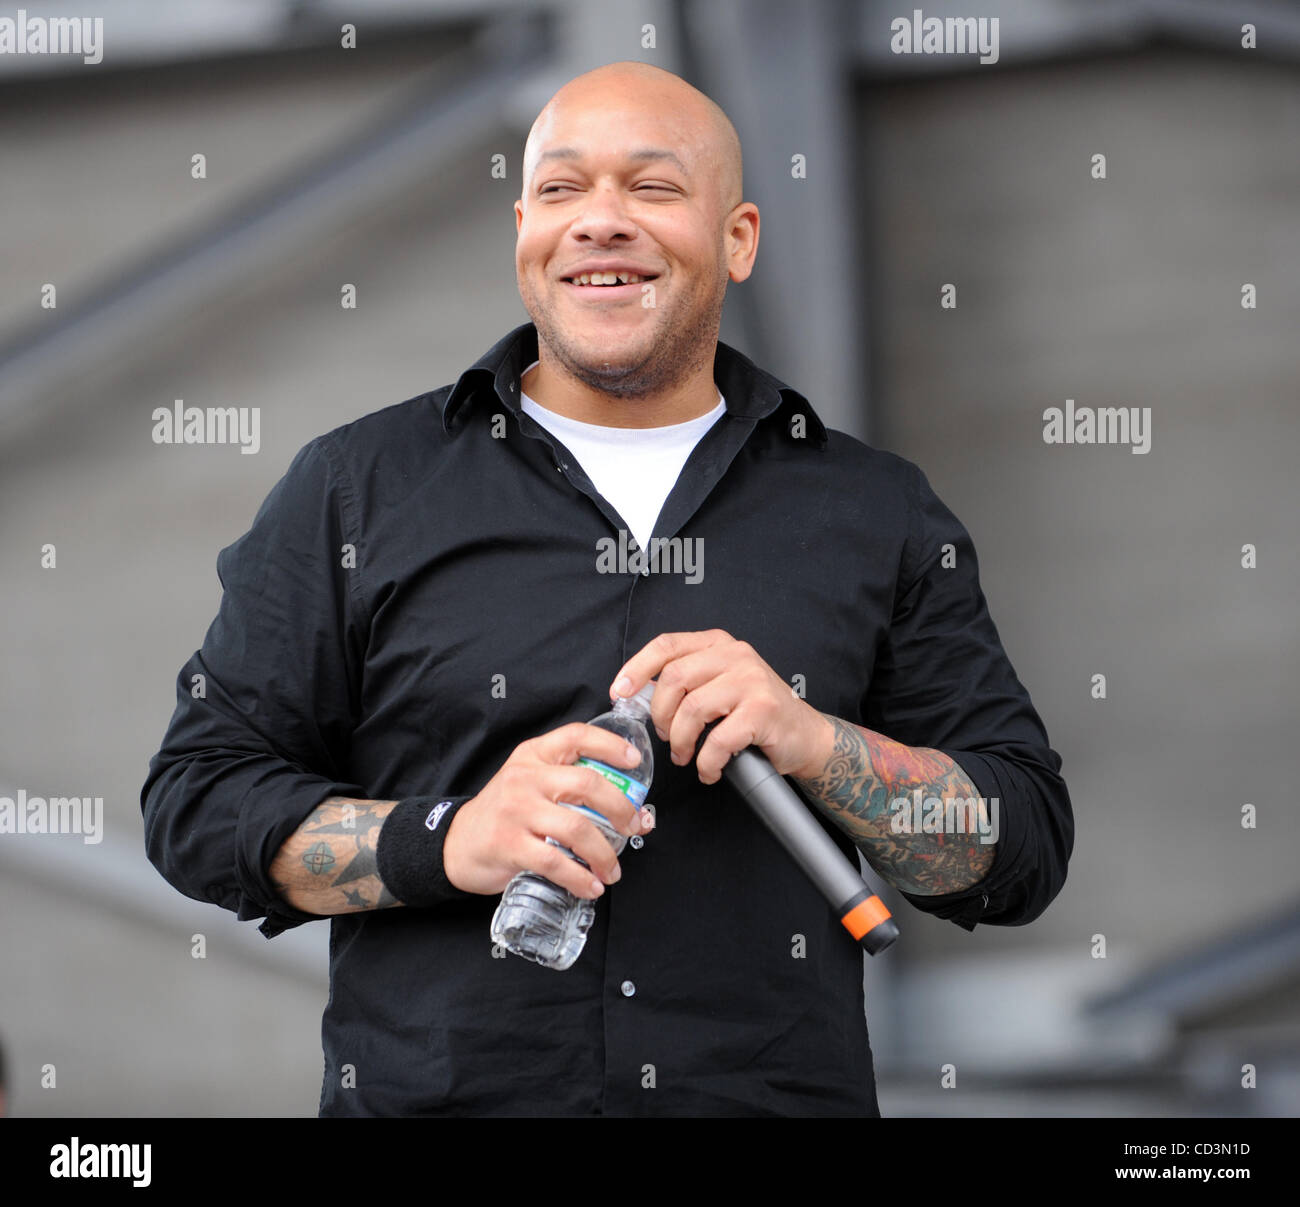 May 17, 2008 - Columbus, Ohio; USA - Singer HOWARD JONES of the band Killswitch Engage performs live as part of the 2nd annual Rock on the Range Music Festival that is taking at Columbus Crew Stadium. Copyright 2008 Jason Moore. Mandatory Credit: Jason Moore Stock Photo